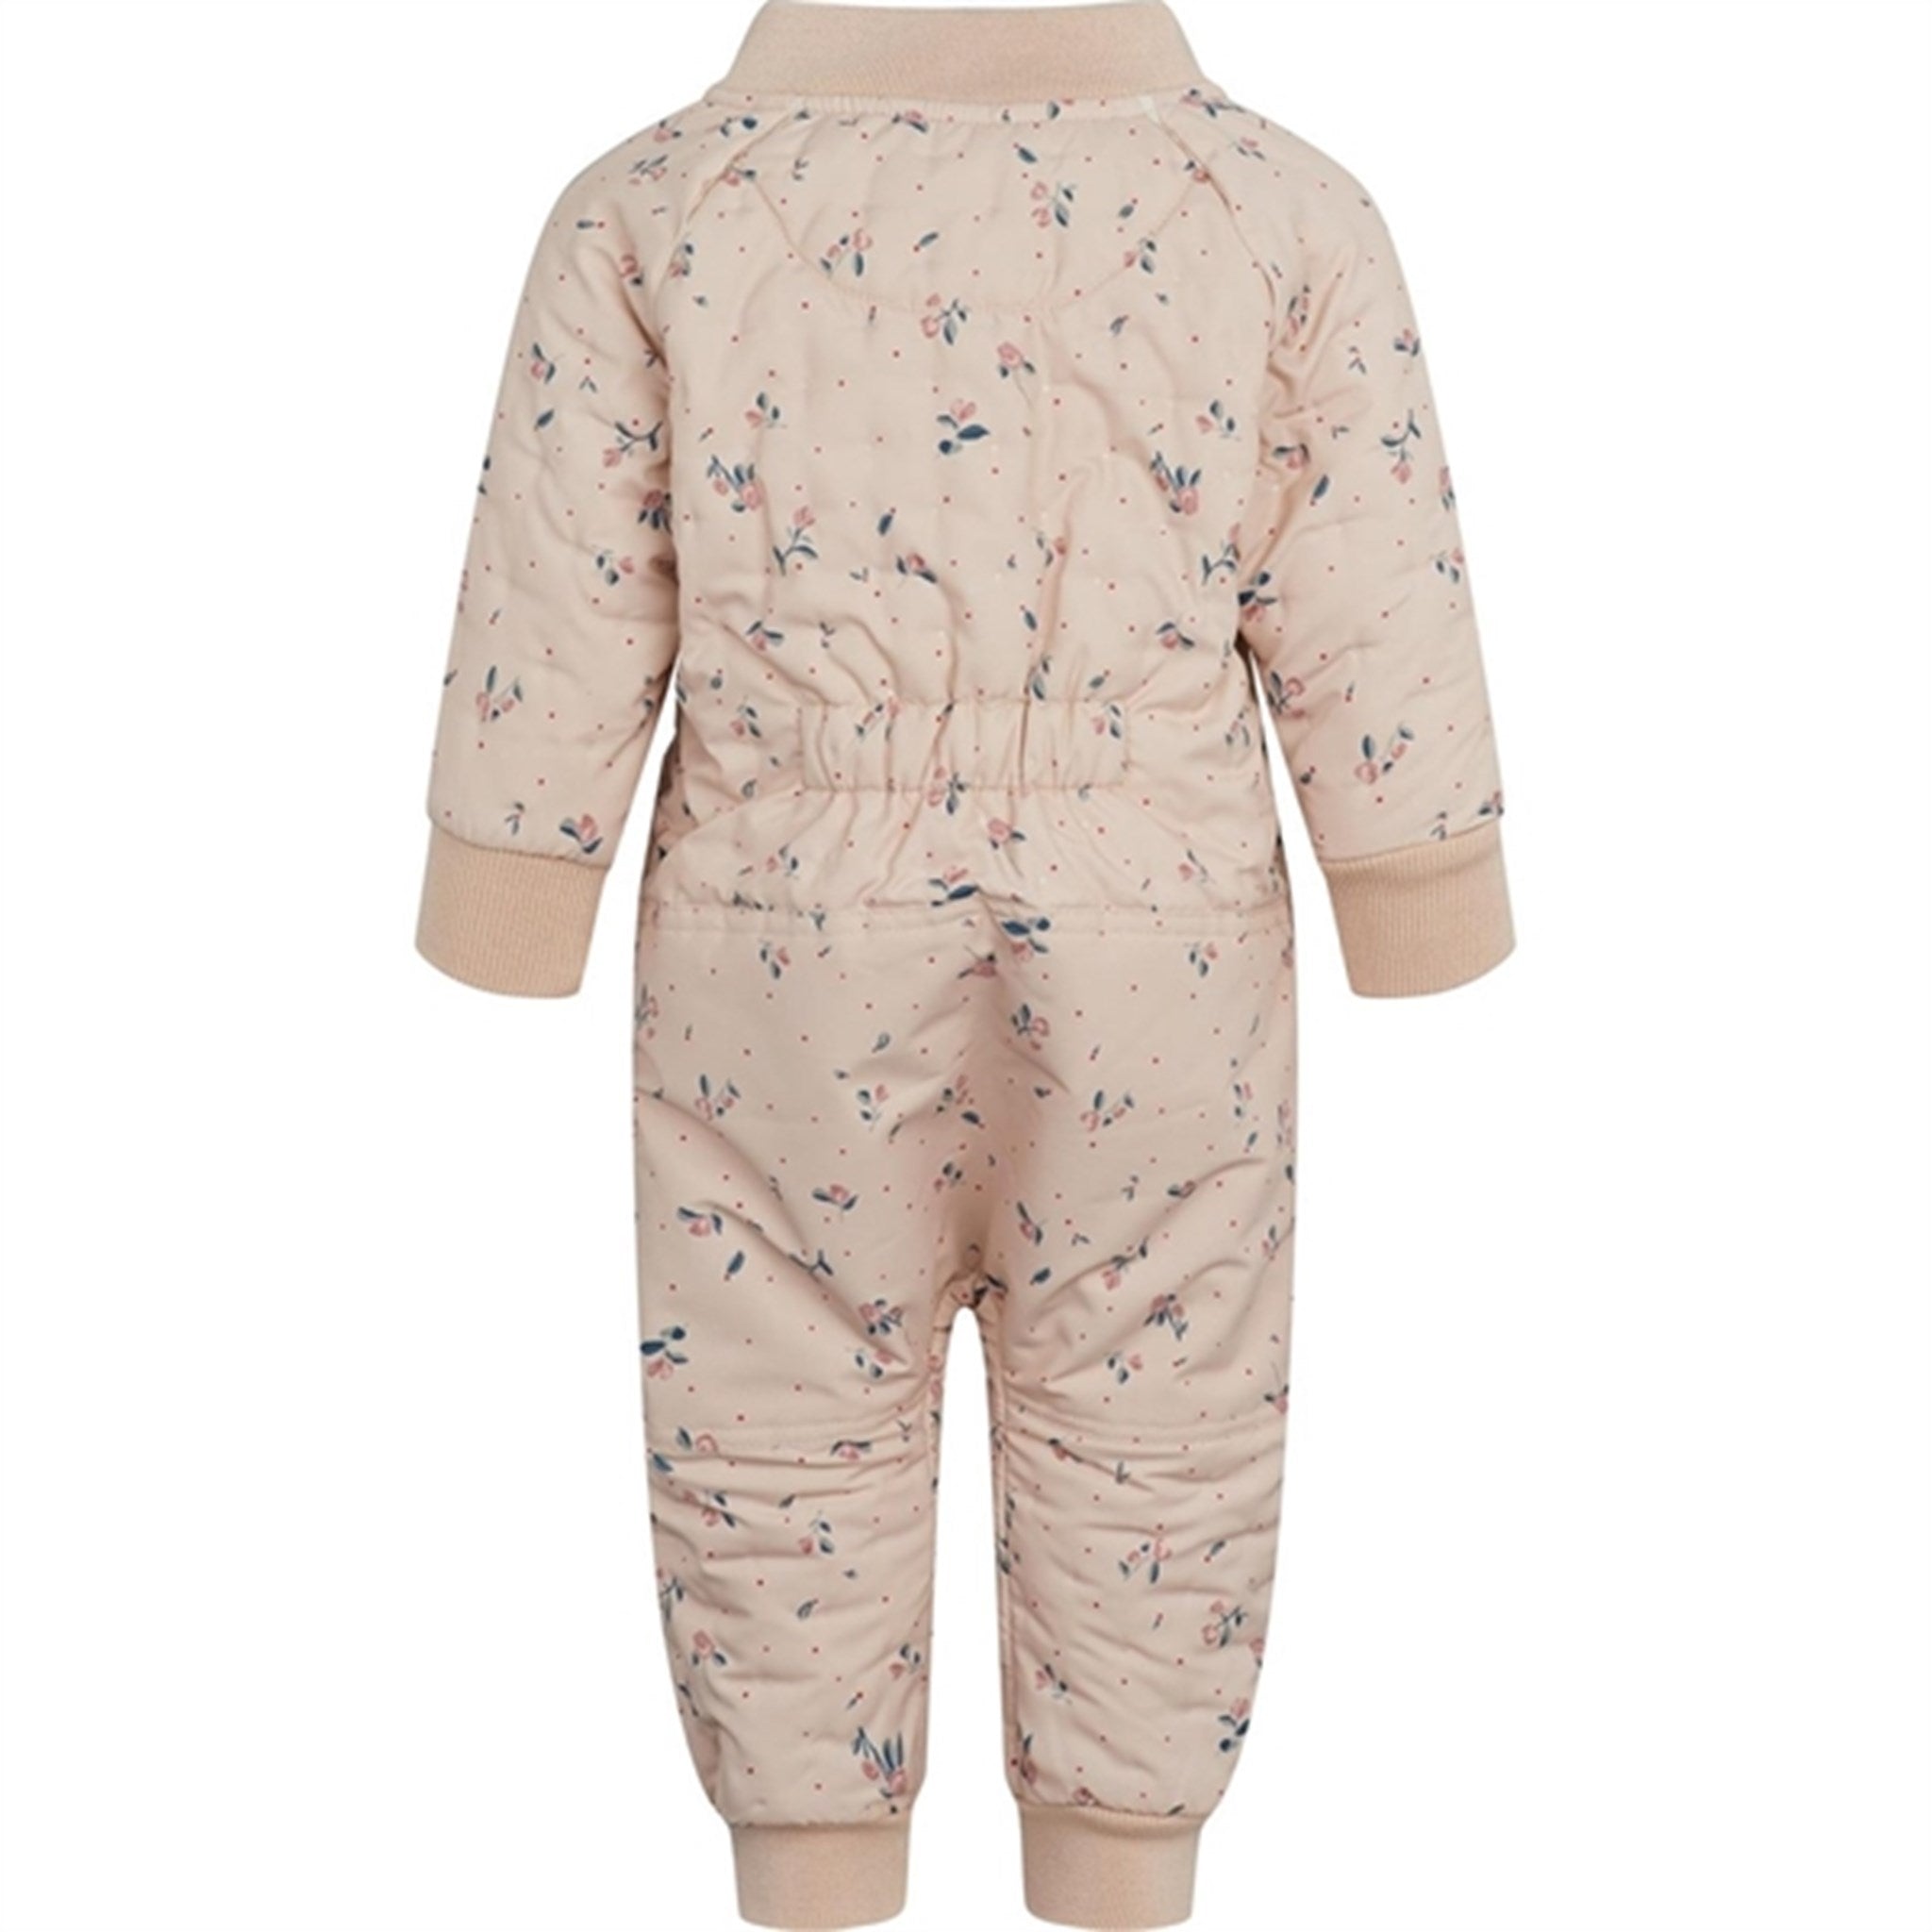 MarMar Floral Sprinkle Oza Thermo Suit 2